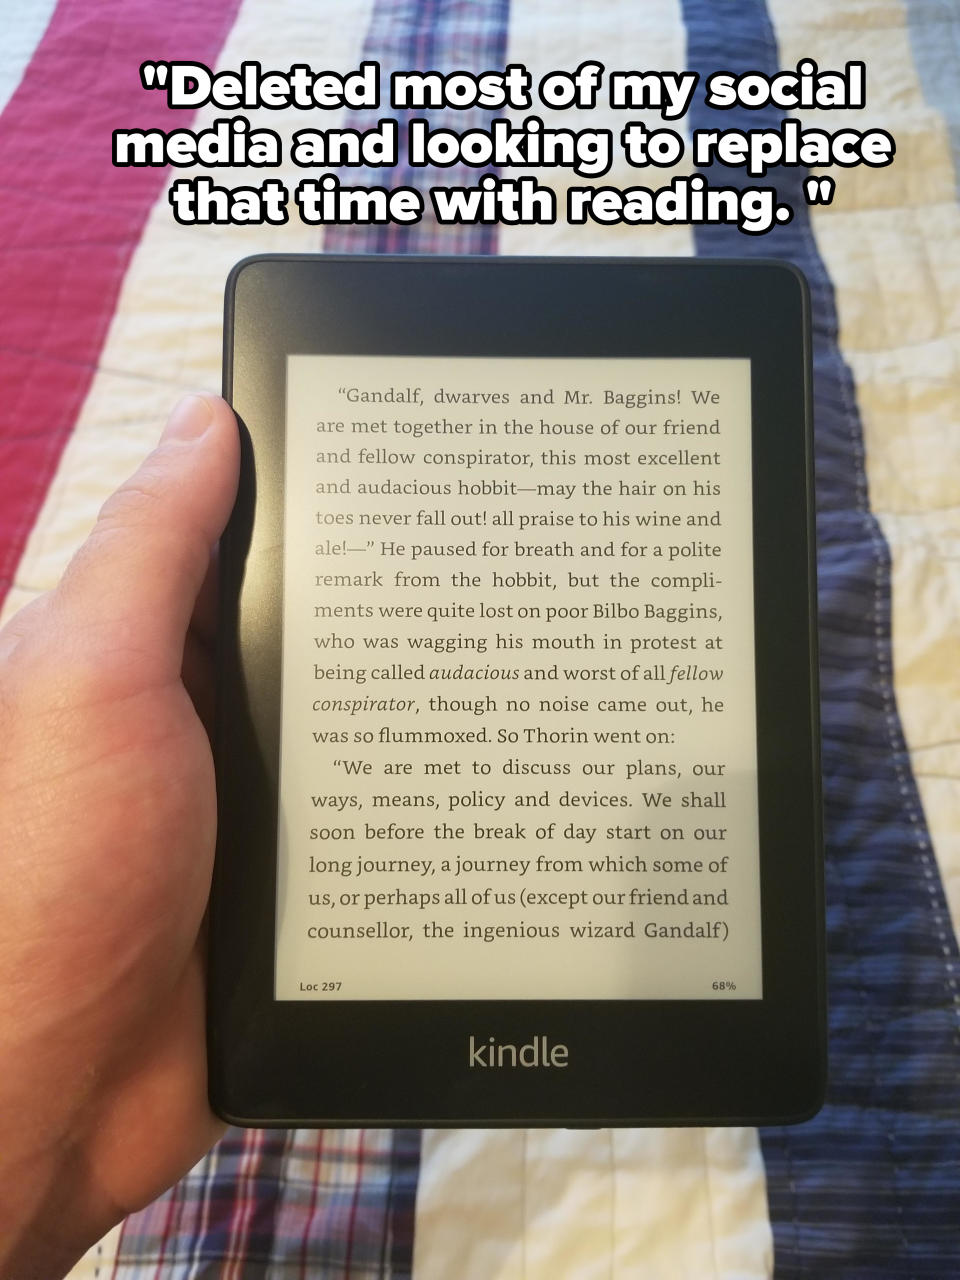 Hand holding a Kindle displaying a page from "The Lord of the Rings" with a text passage about Gandalf and Mr. Baggins